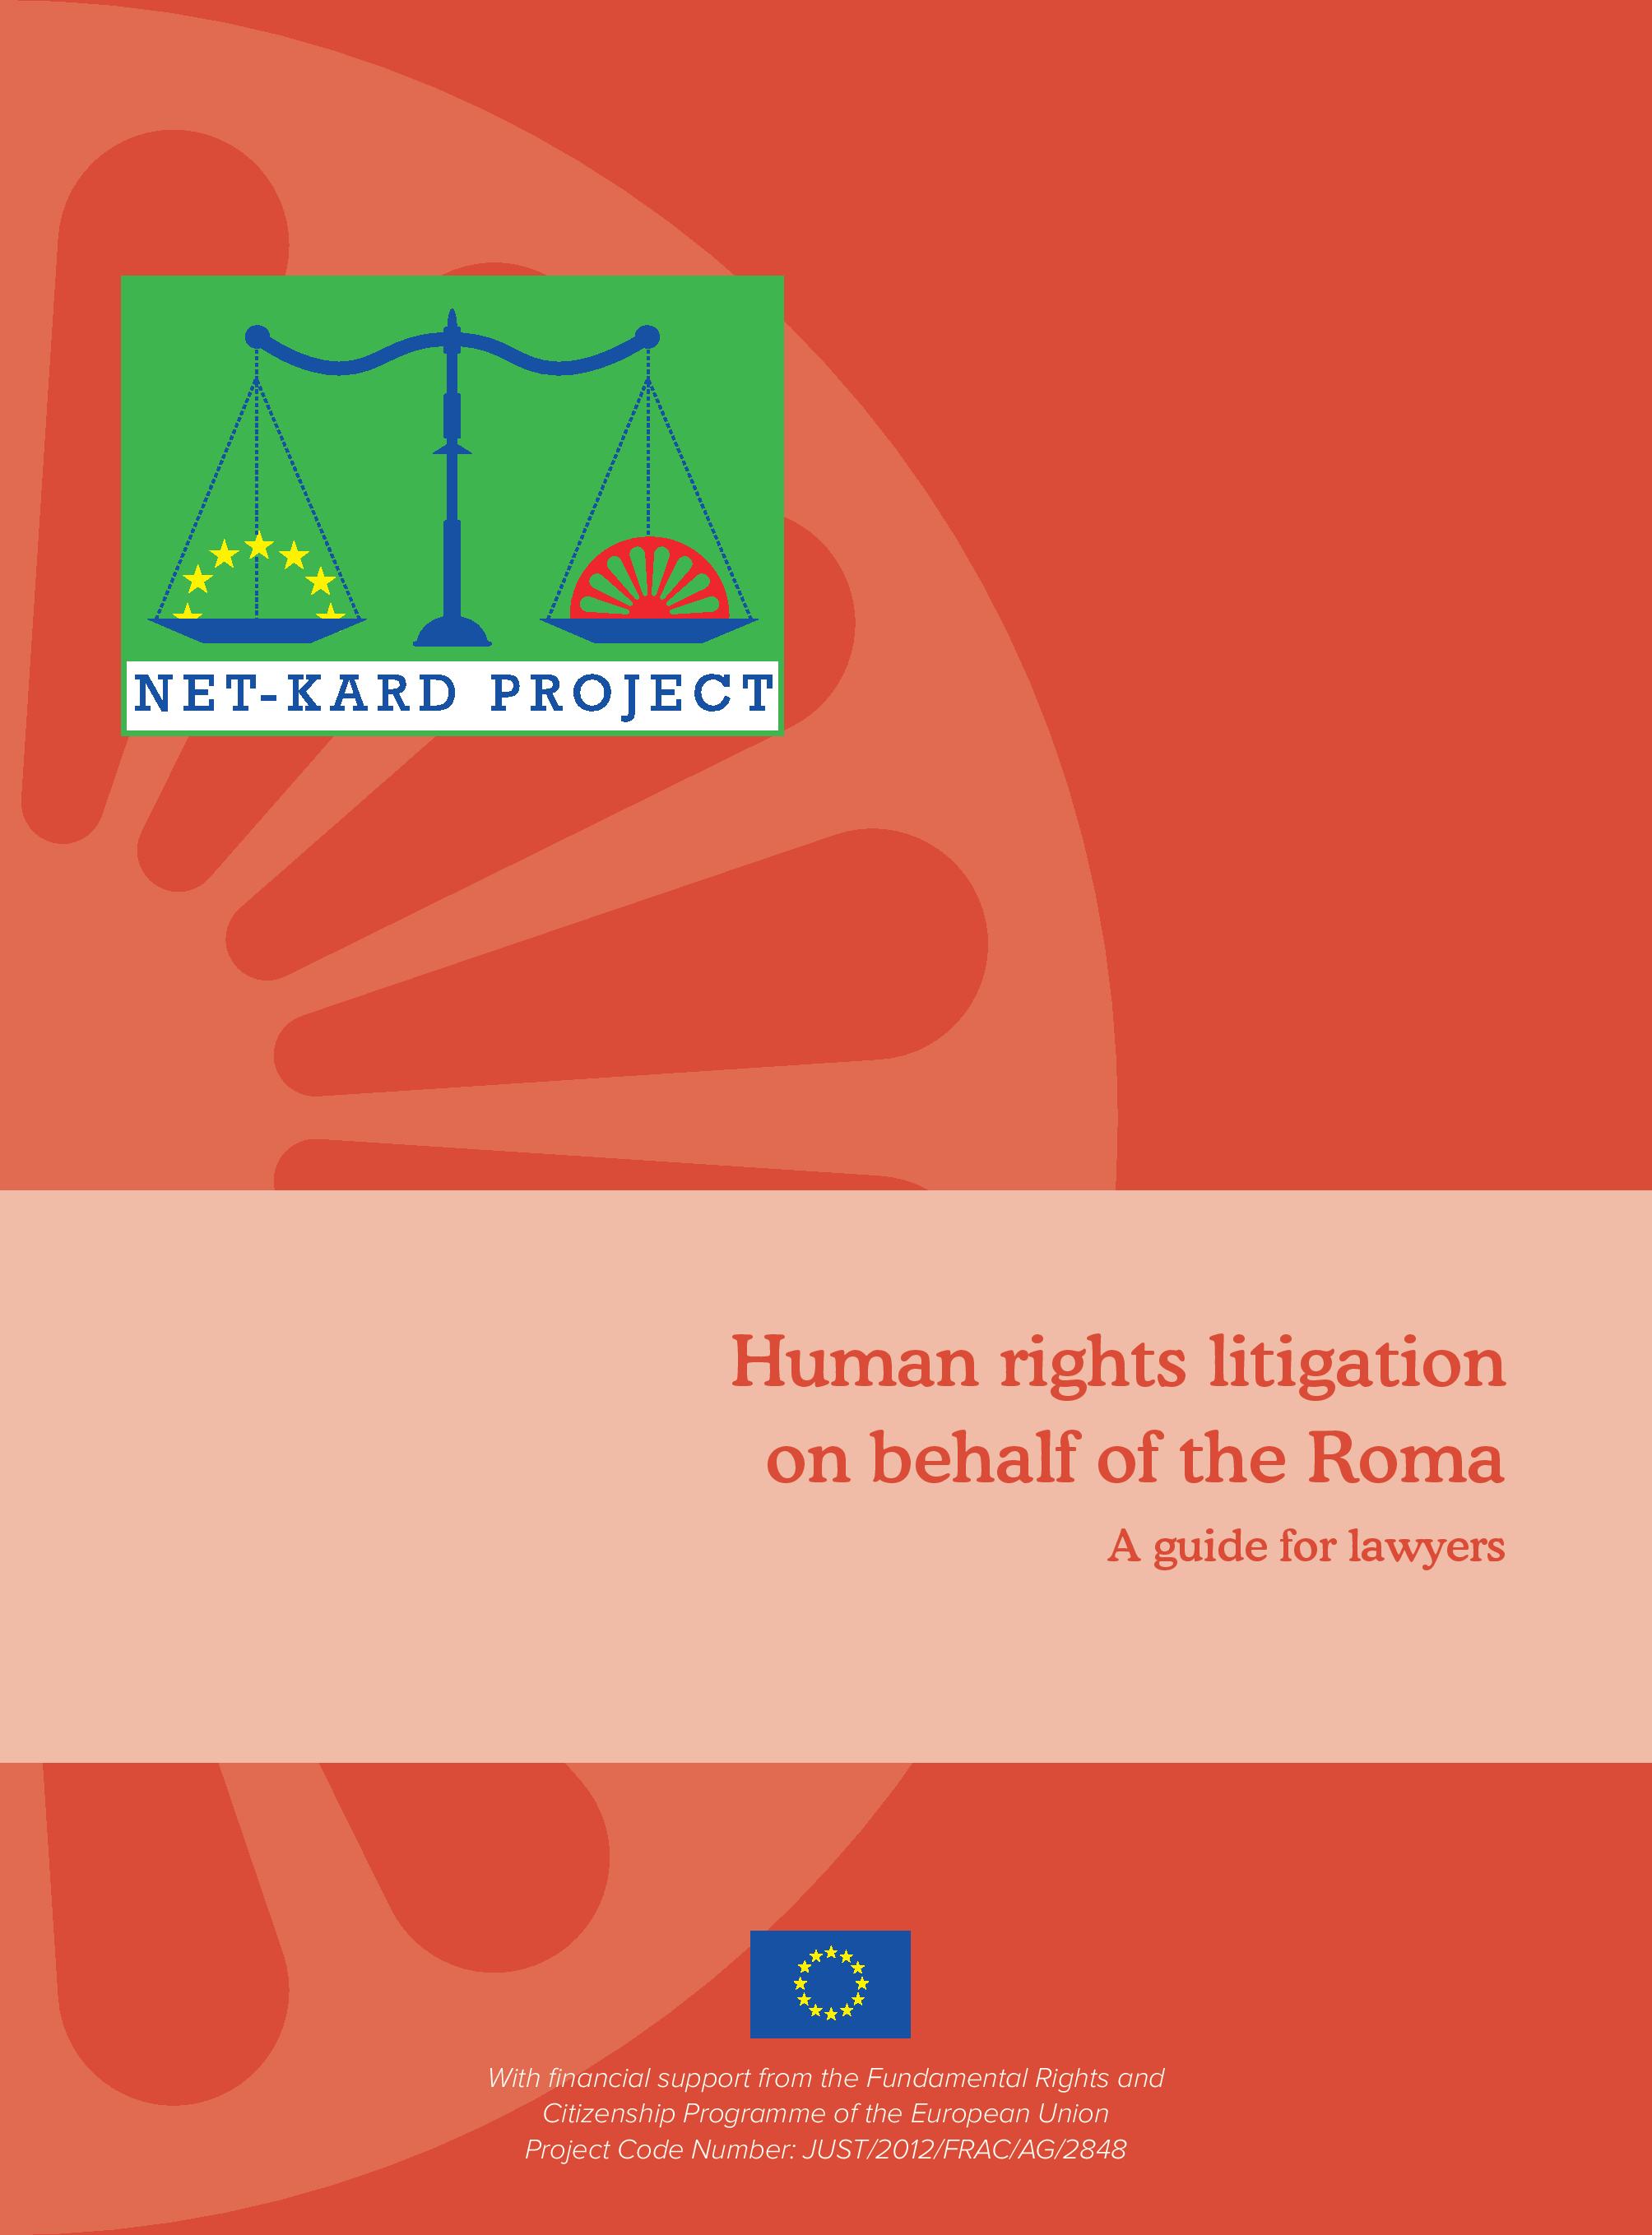 Human Rights litigation on behalf of the Roma